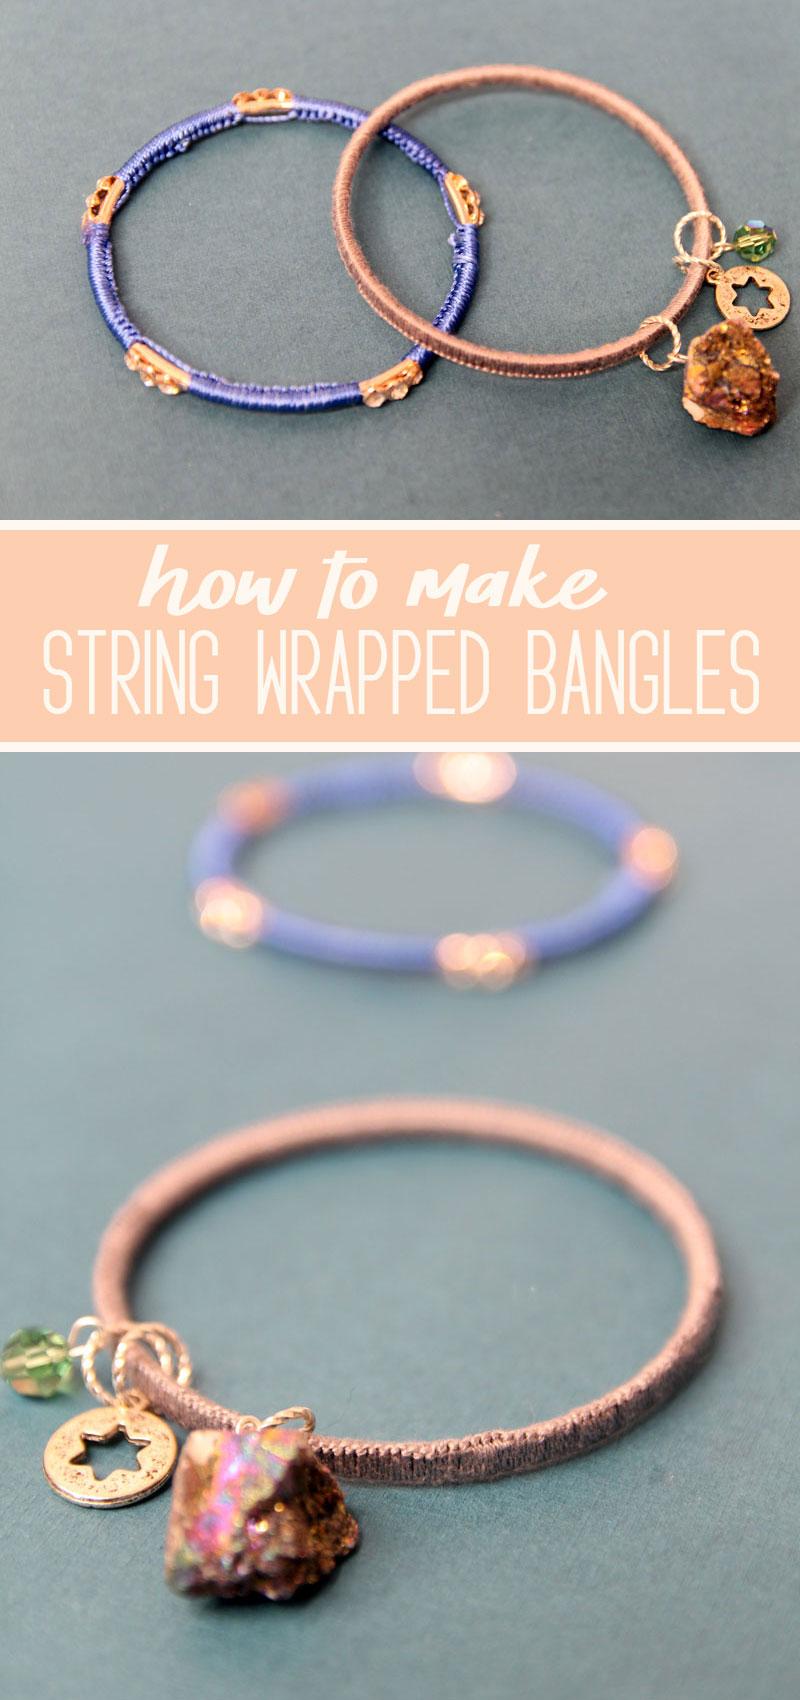 How to Make Stone Silk Thread Bangles in 5Minute  Crafts for Beginners   12 Steps  Instructables